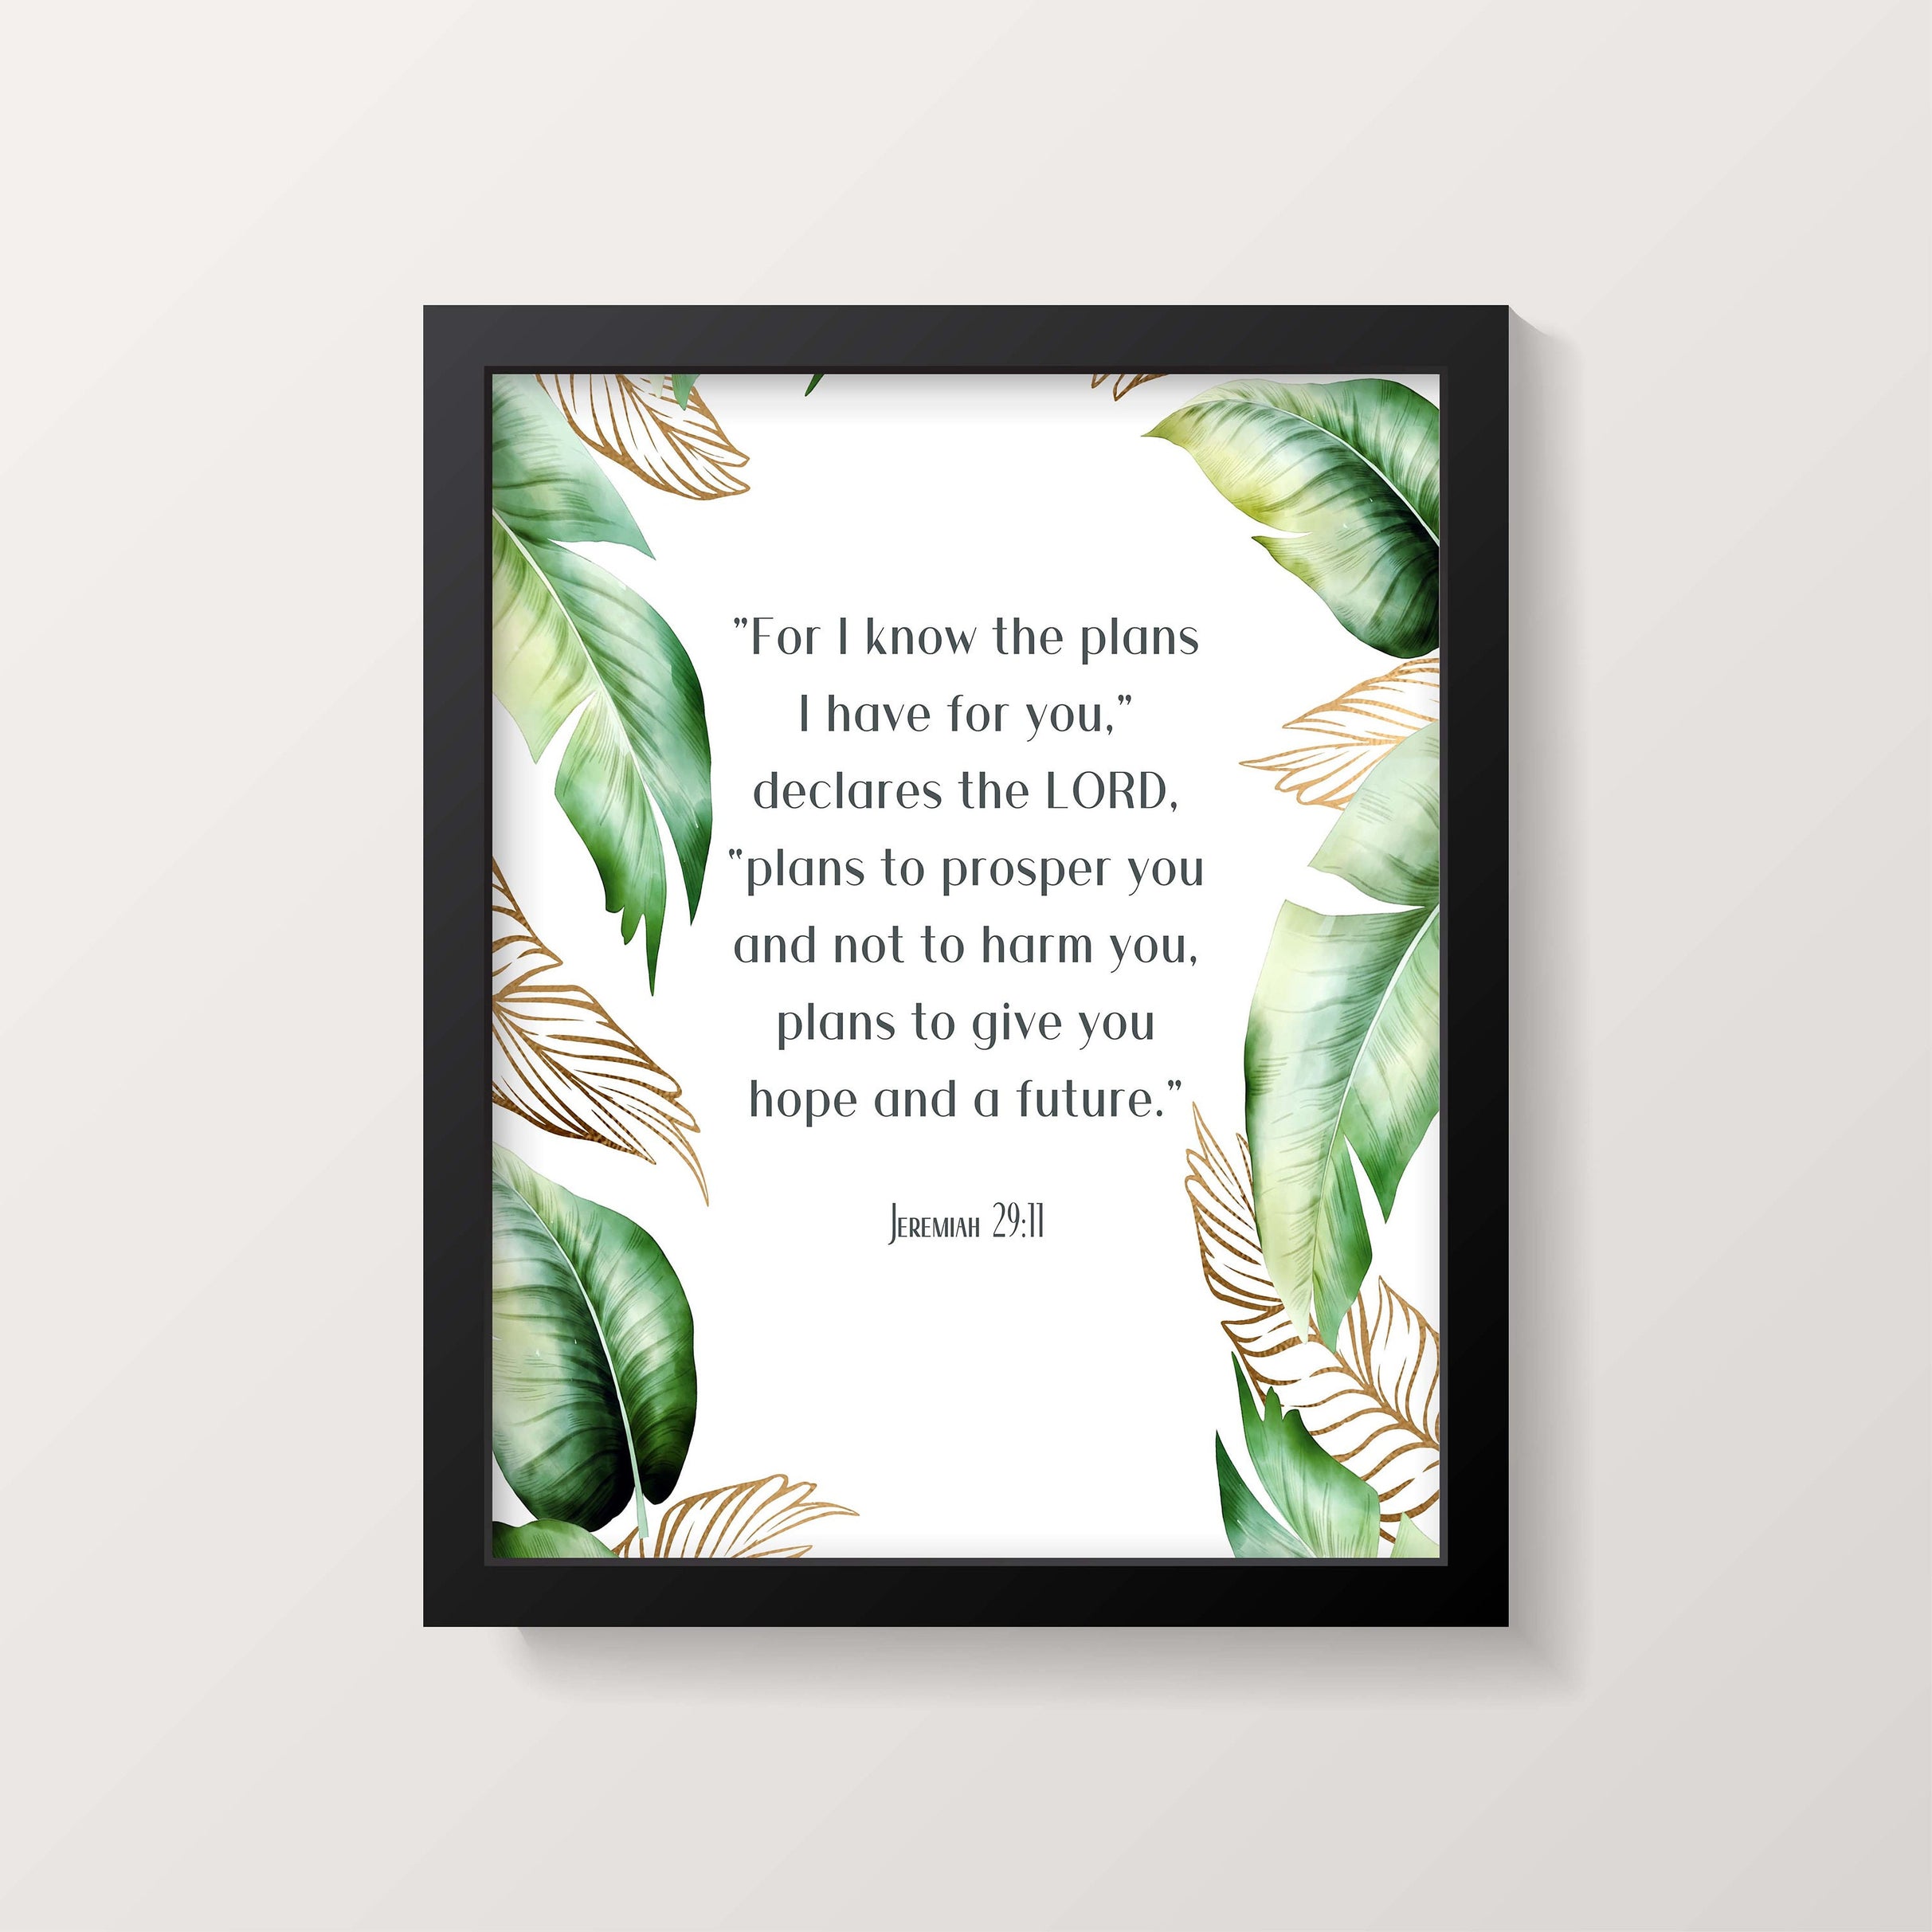 Give you Hope and a Future Jeremiah 29:11 Bible Verse Print, Inspirational Gift Wall Art Unframed